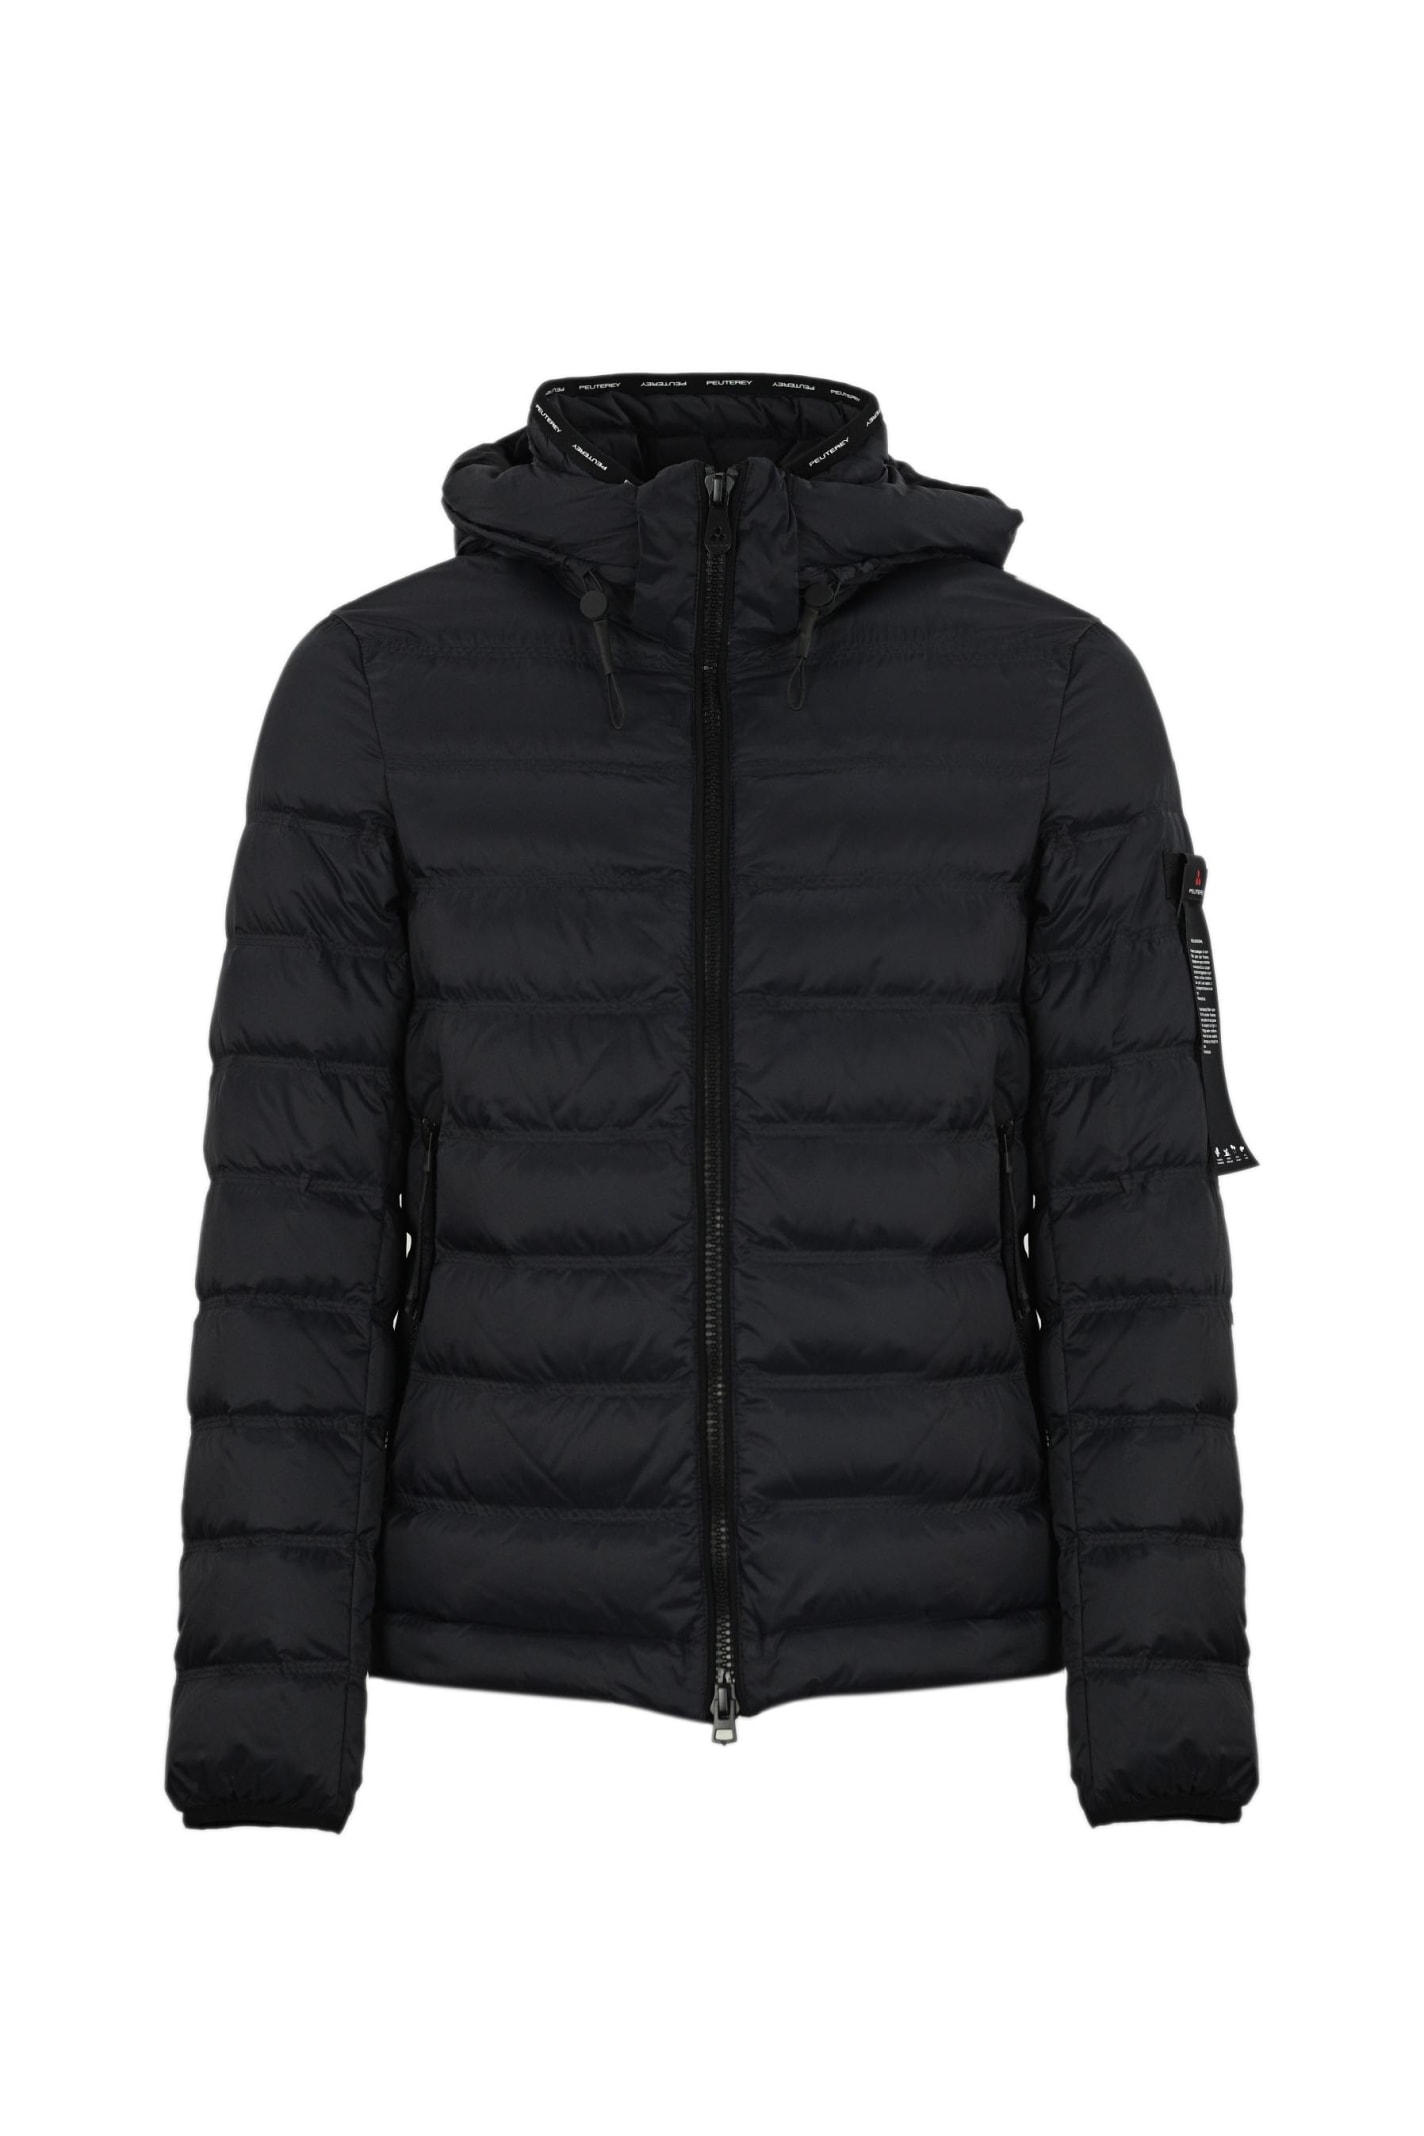 Peuterey Super-light And Semi-glossy Quilted Down Jacket